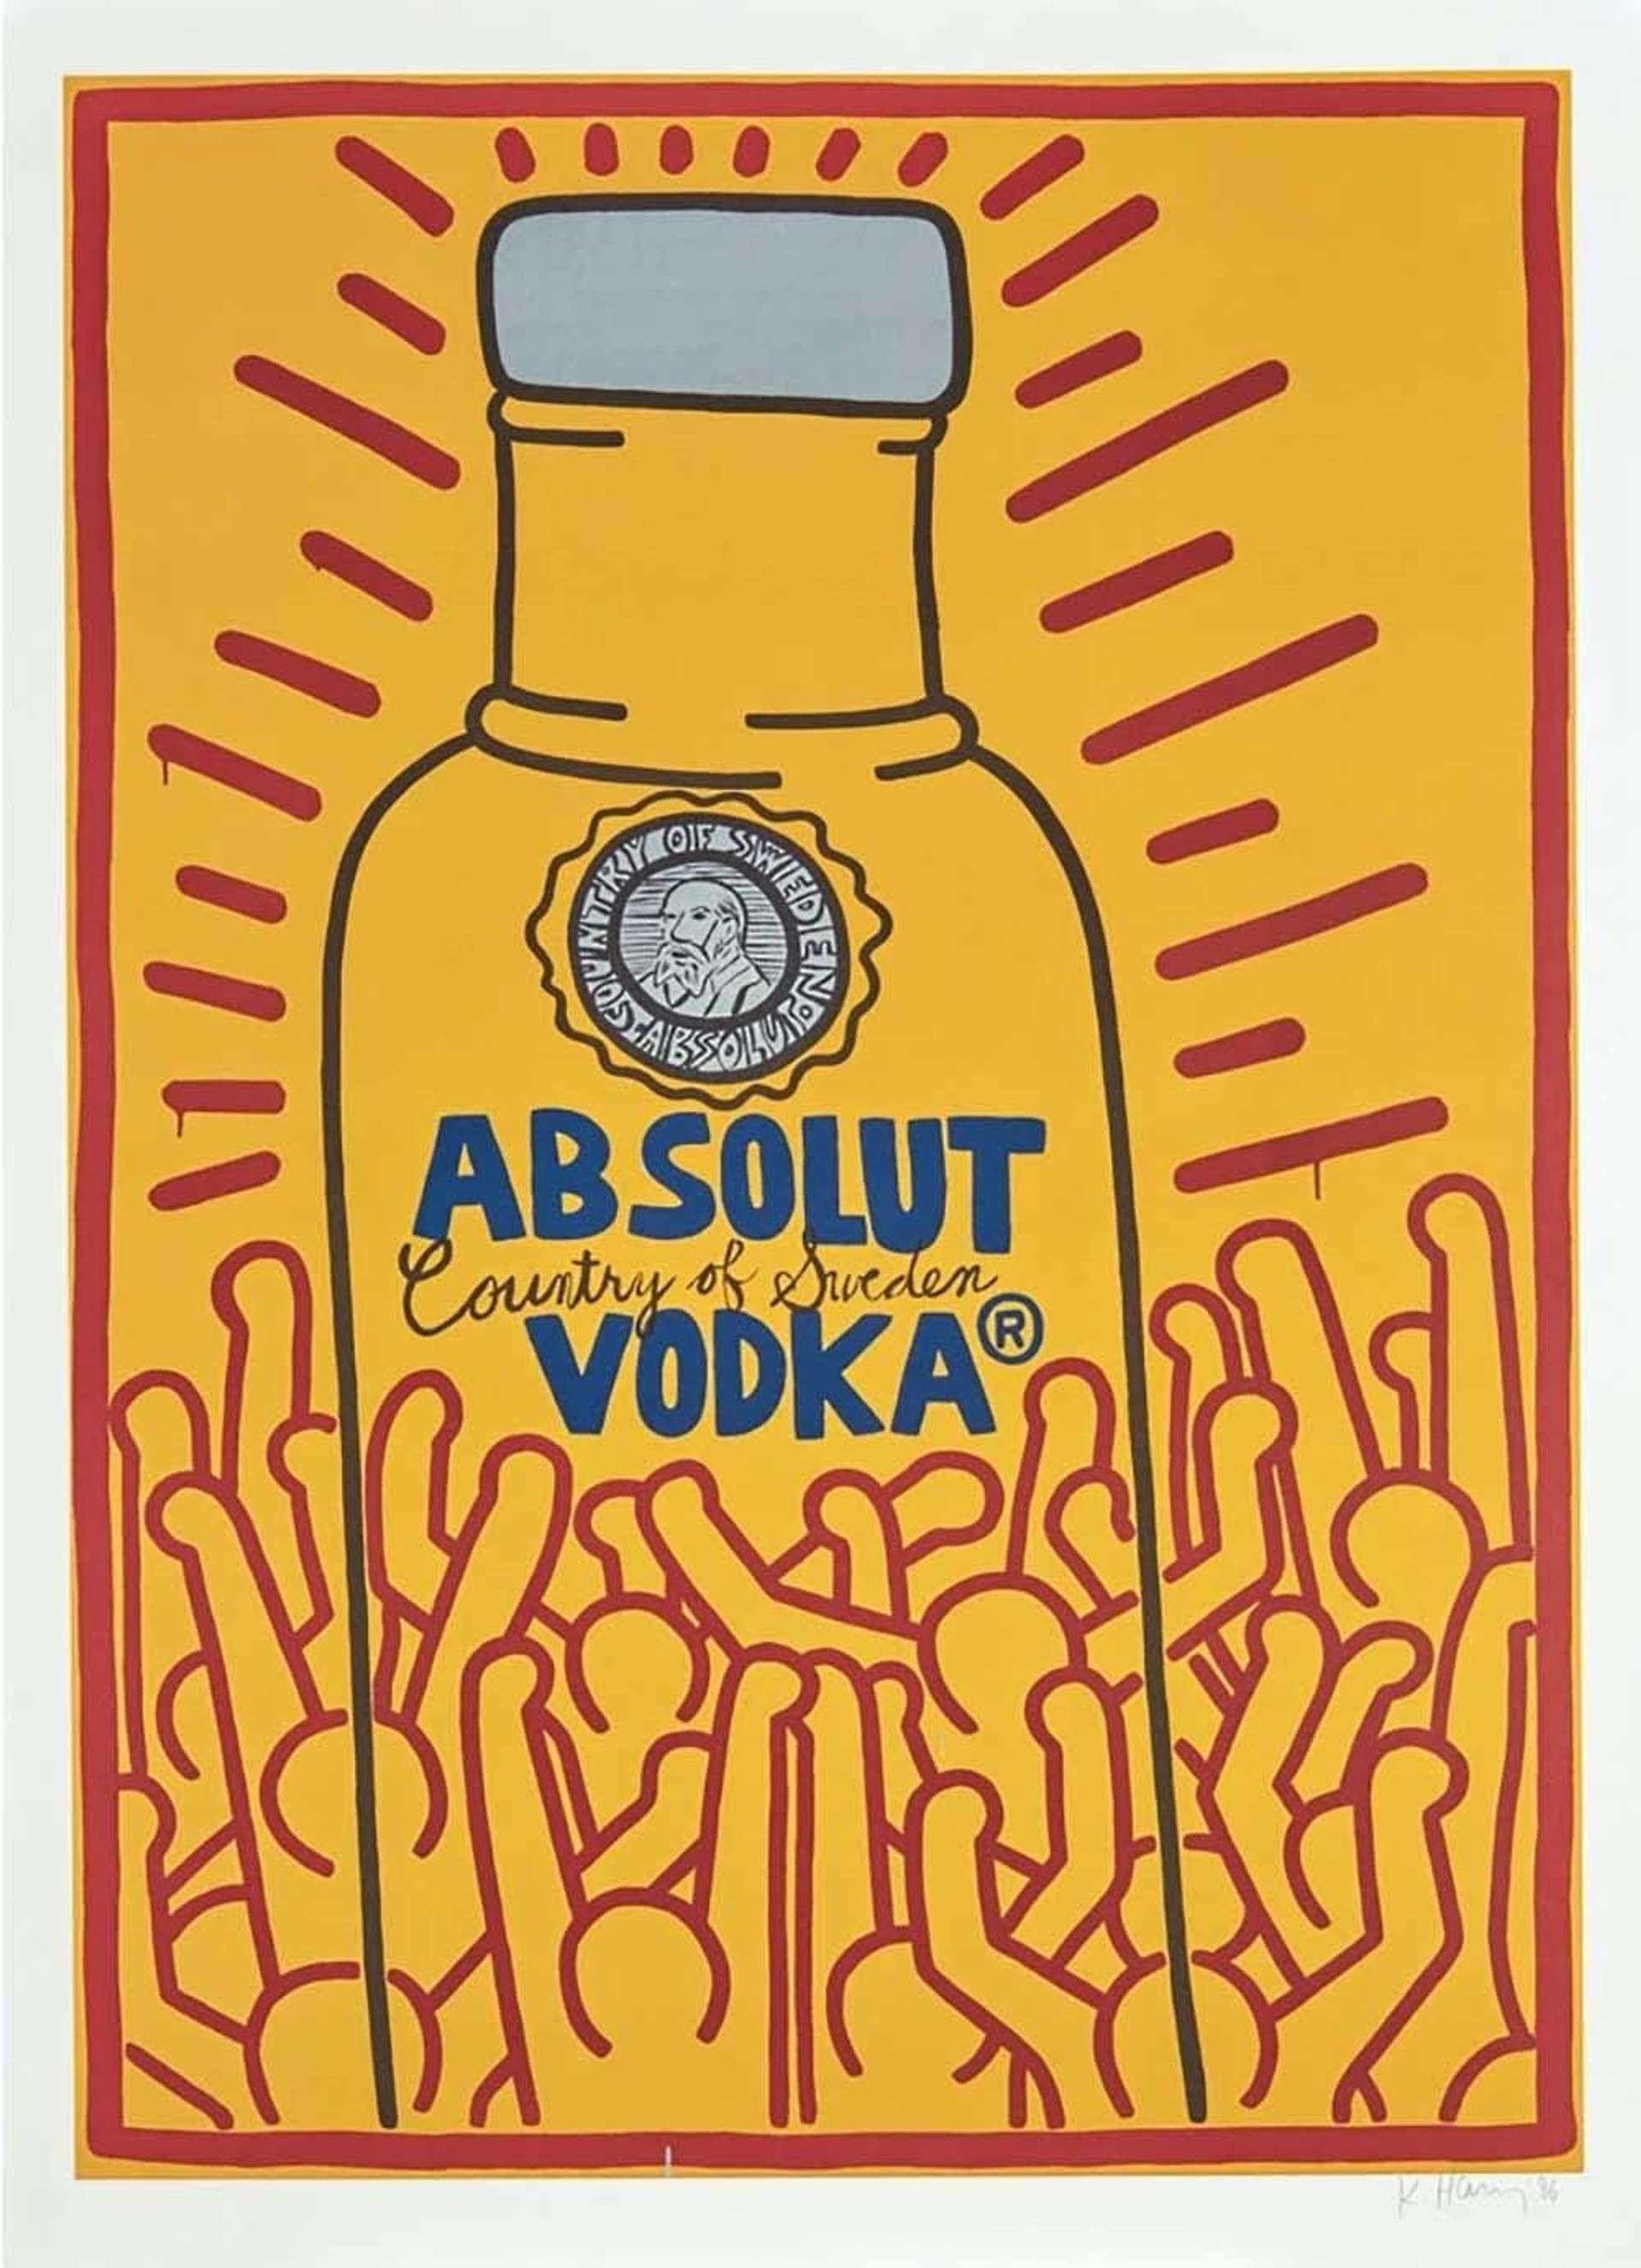 Keith Haring’s Absolut Haring. A Pop Art style poster of the Absolut Vodka brand and moving figures